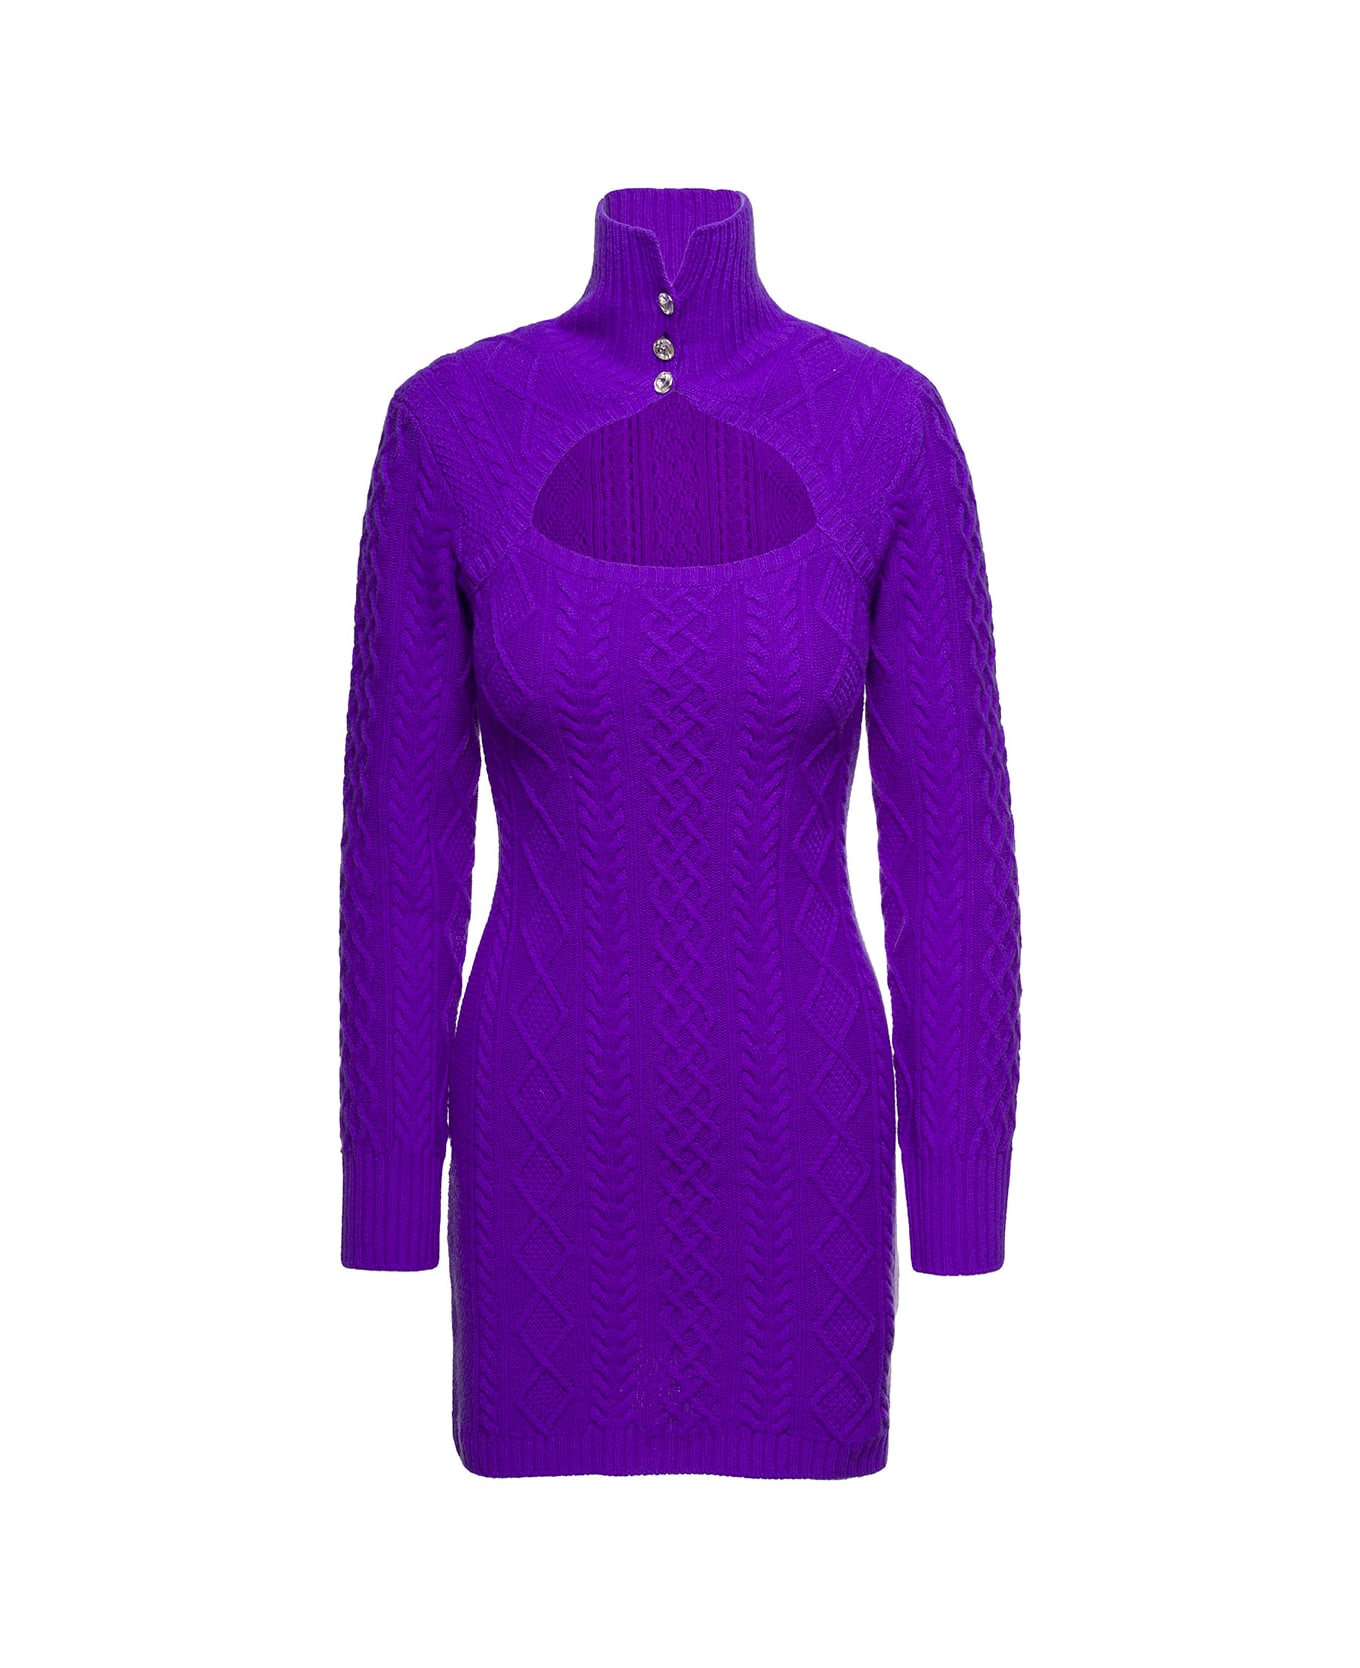 Eleonora Gottardi Purple Cable Knit Mini Dress With Cut-out Detail In Cashmere And Wool Woman Eleonora Gottardi - Violet